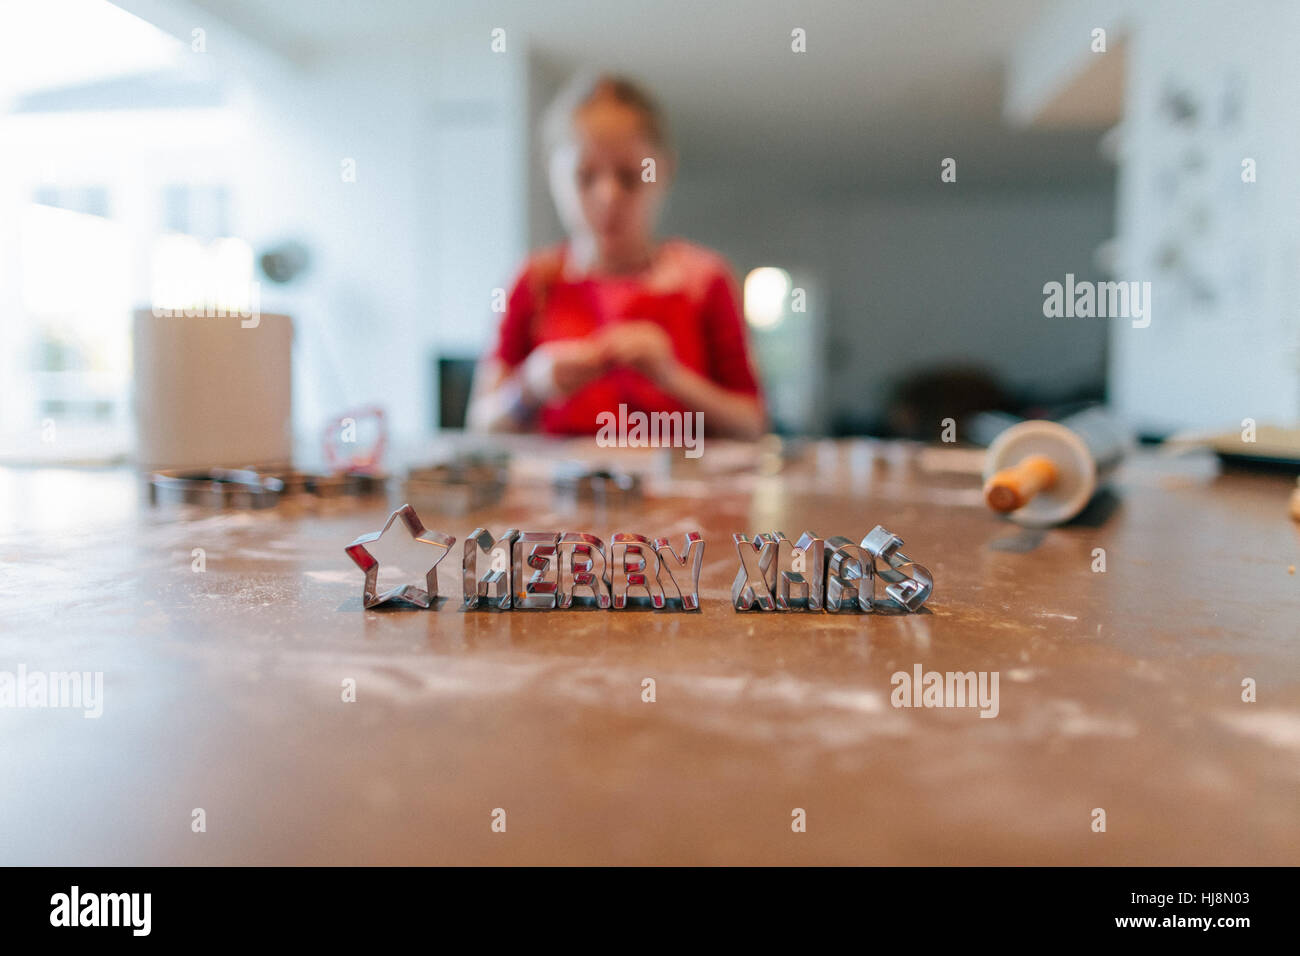 Girl baking with Merry Christmas cookie cutters on table Stock Photo